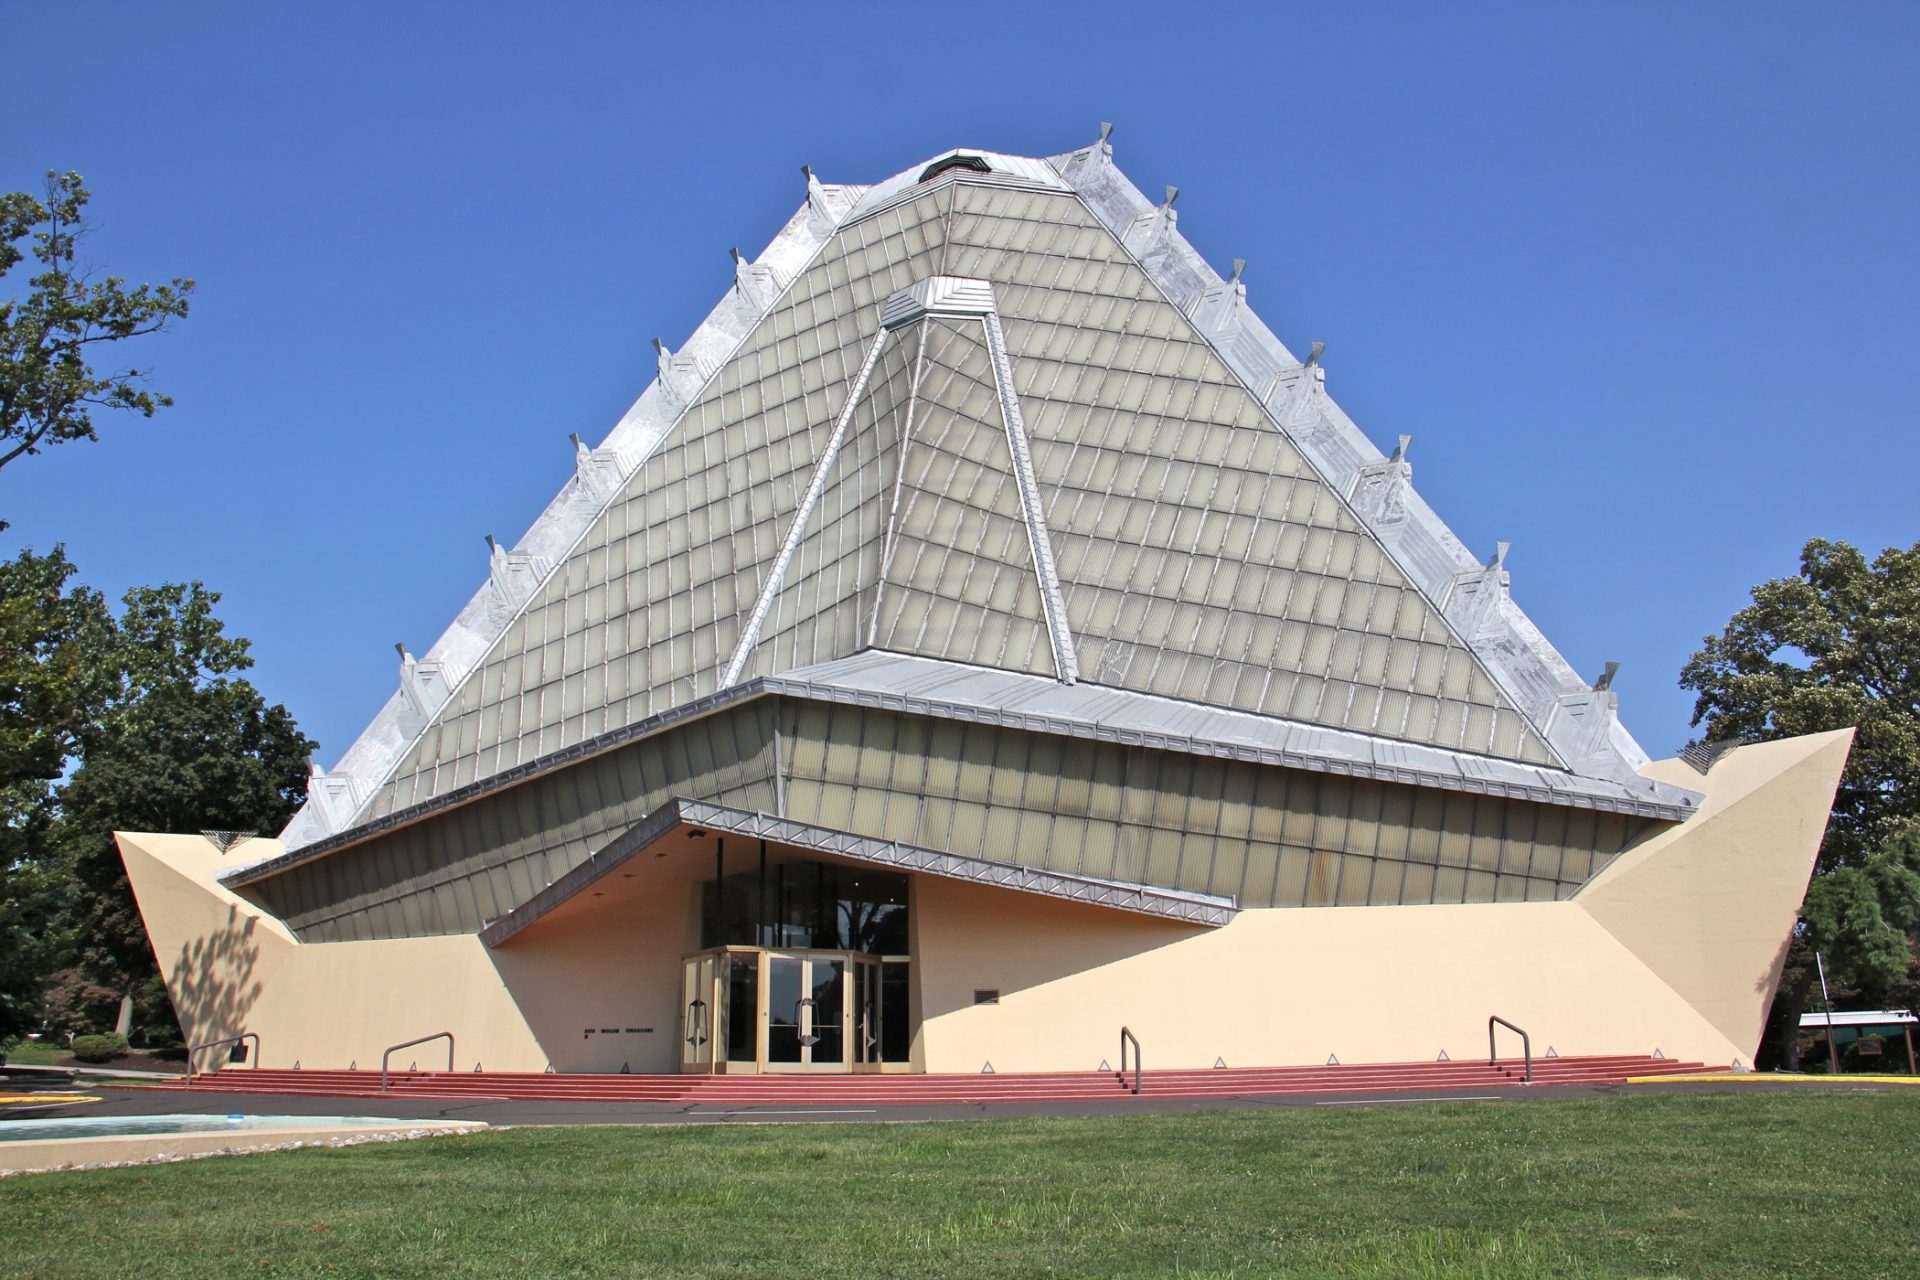 Beth Sholom Synagogue in Elkins Park is the only synagogue designed by architect Frank Lloyd Wright. The building was completed in 1959.